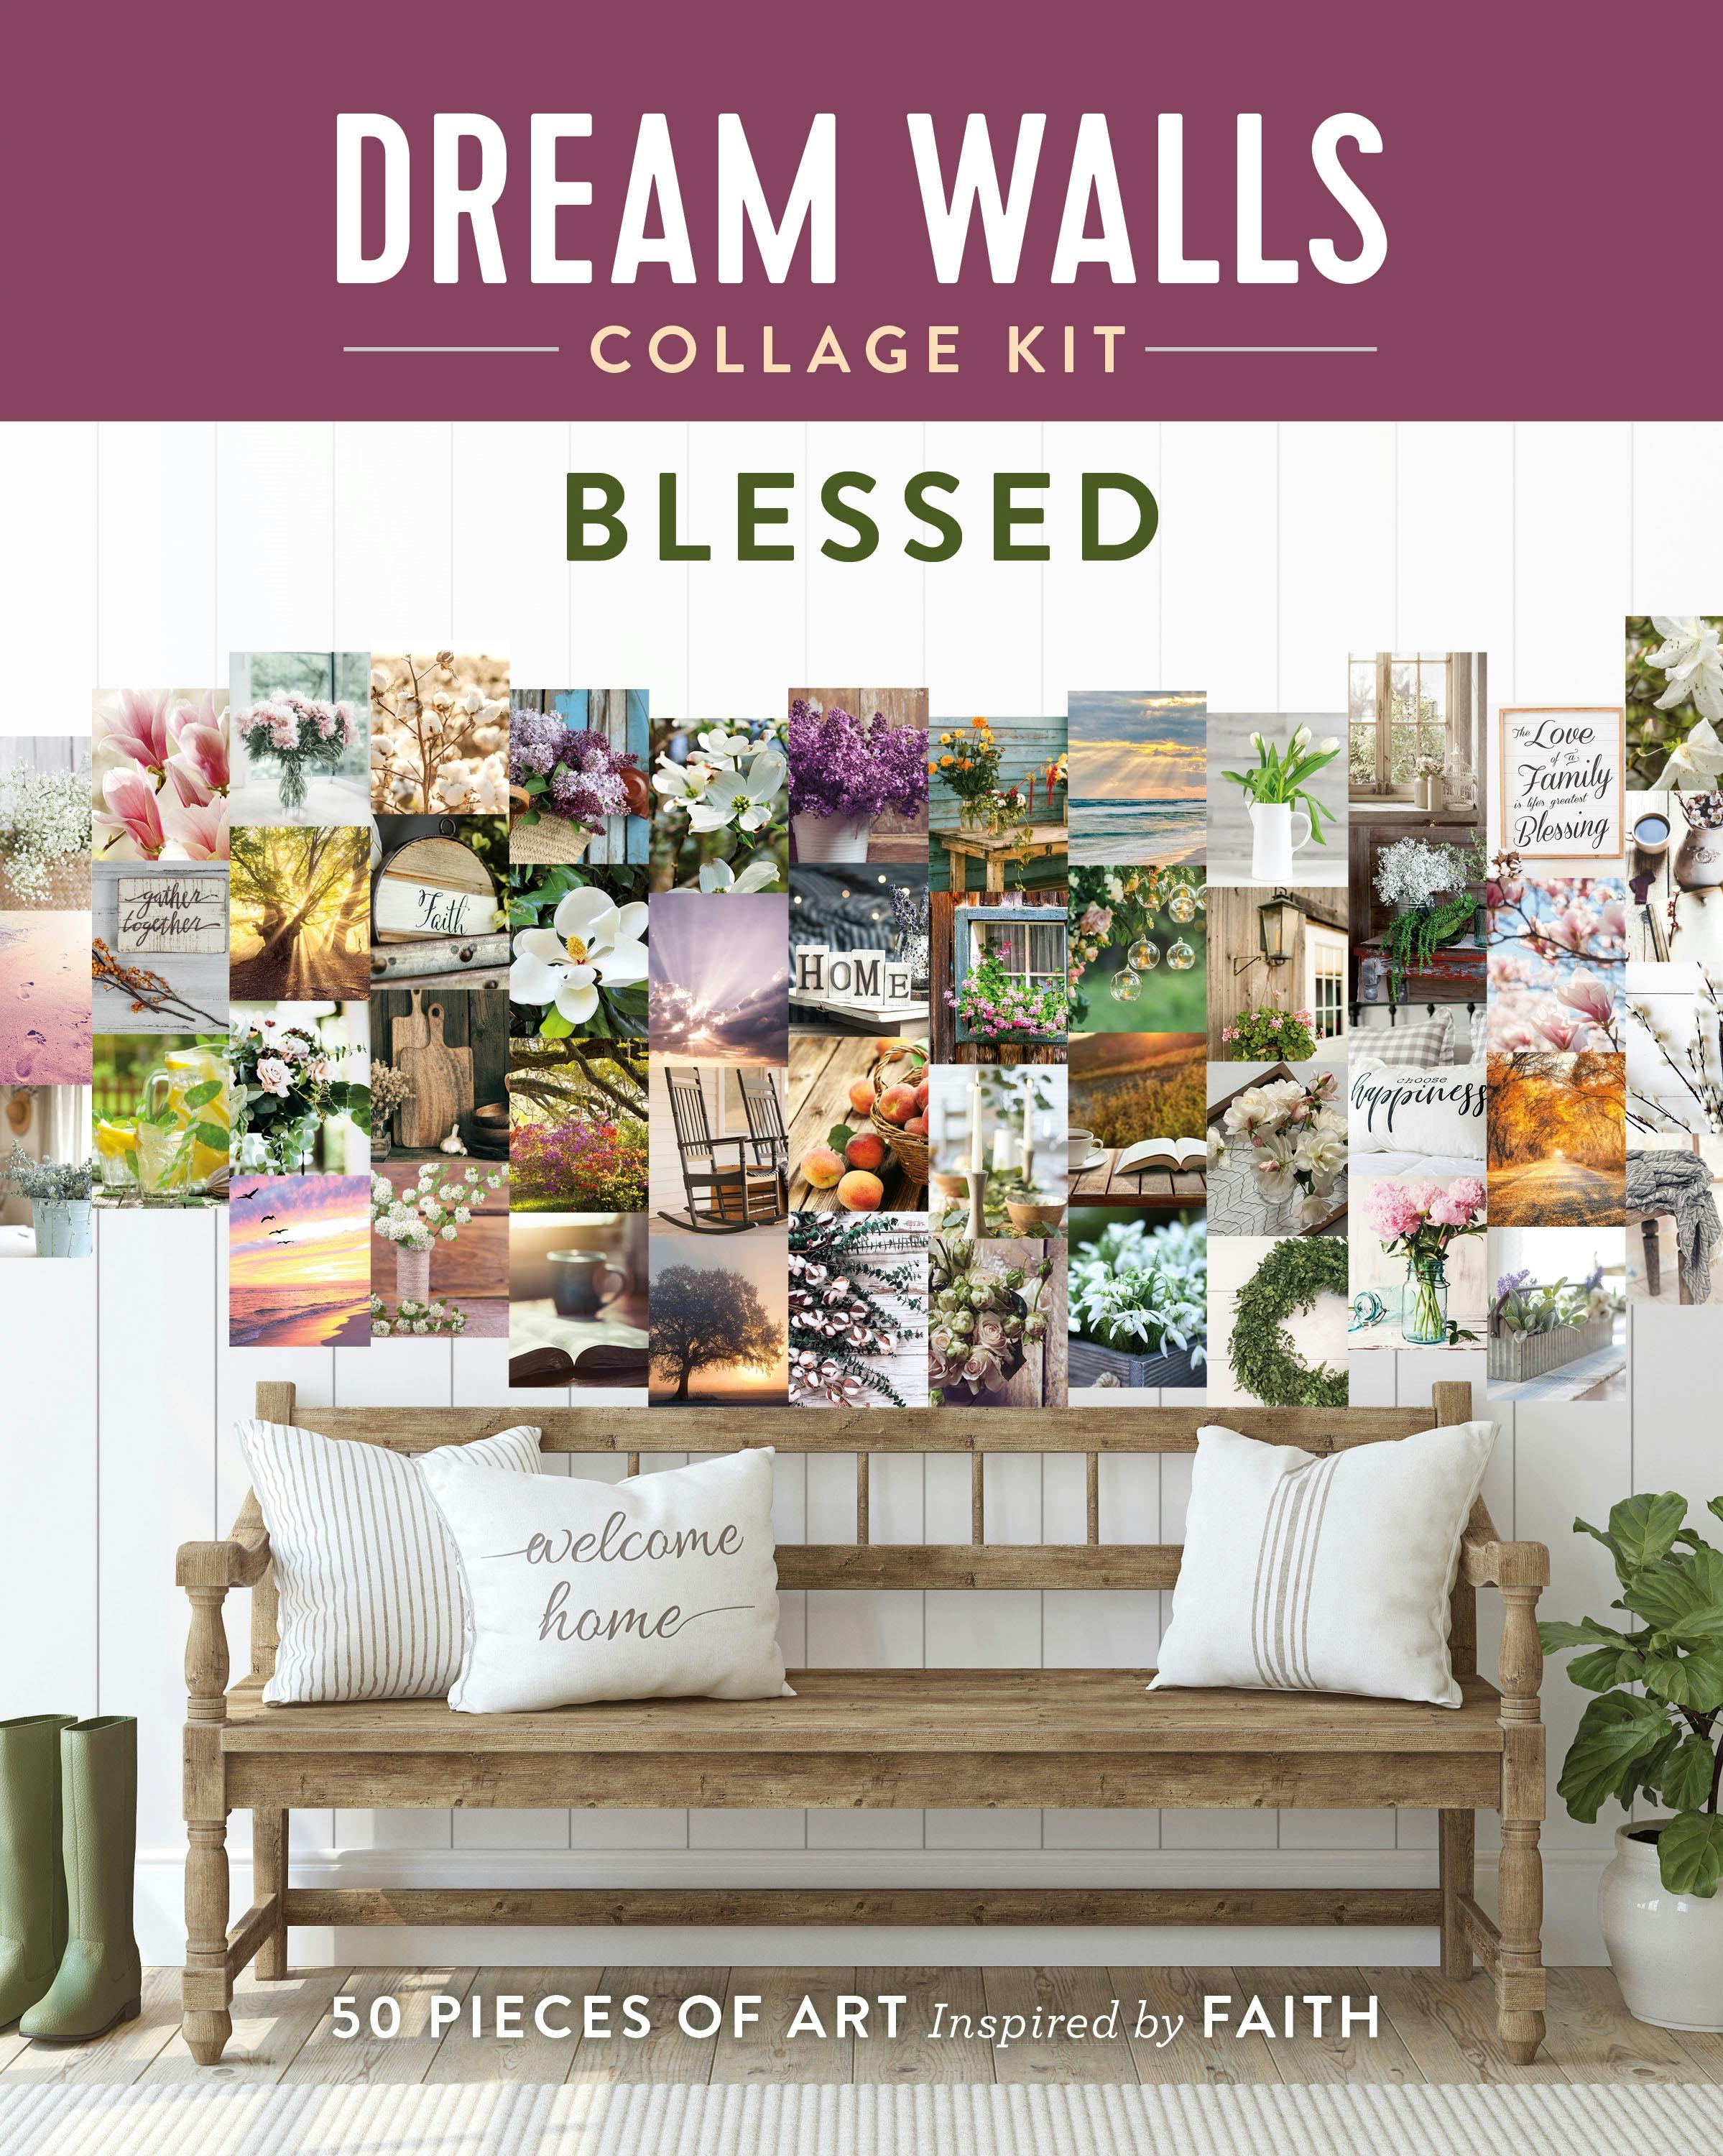 Dream Walls Collage Kit: Blessed